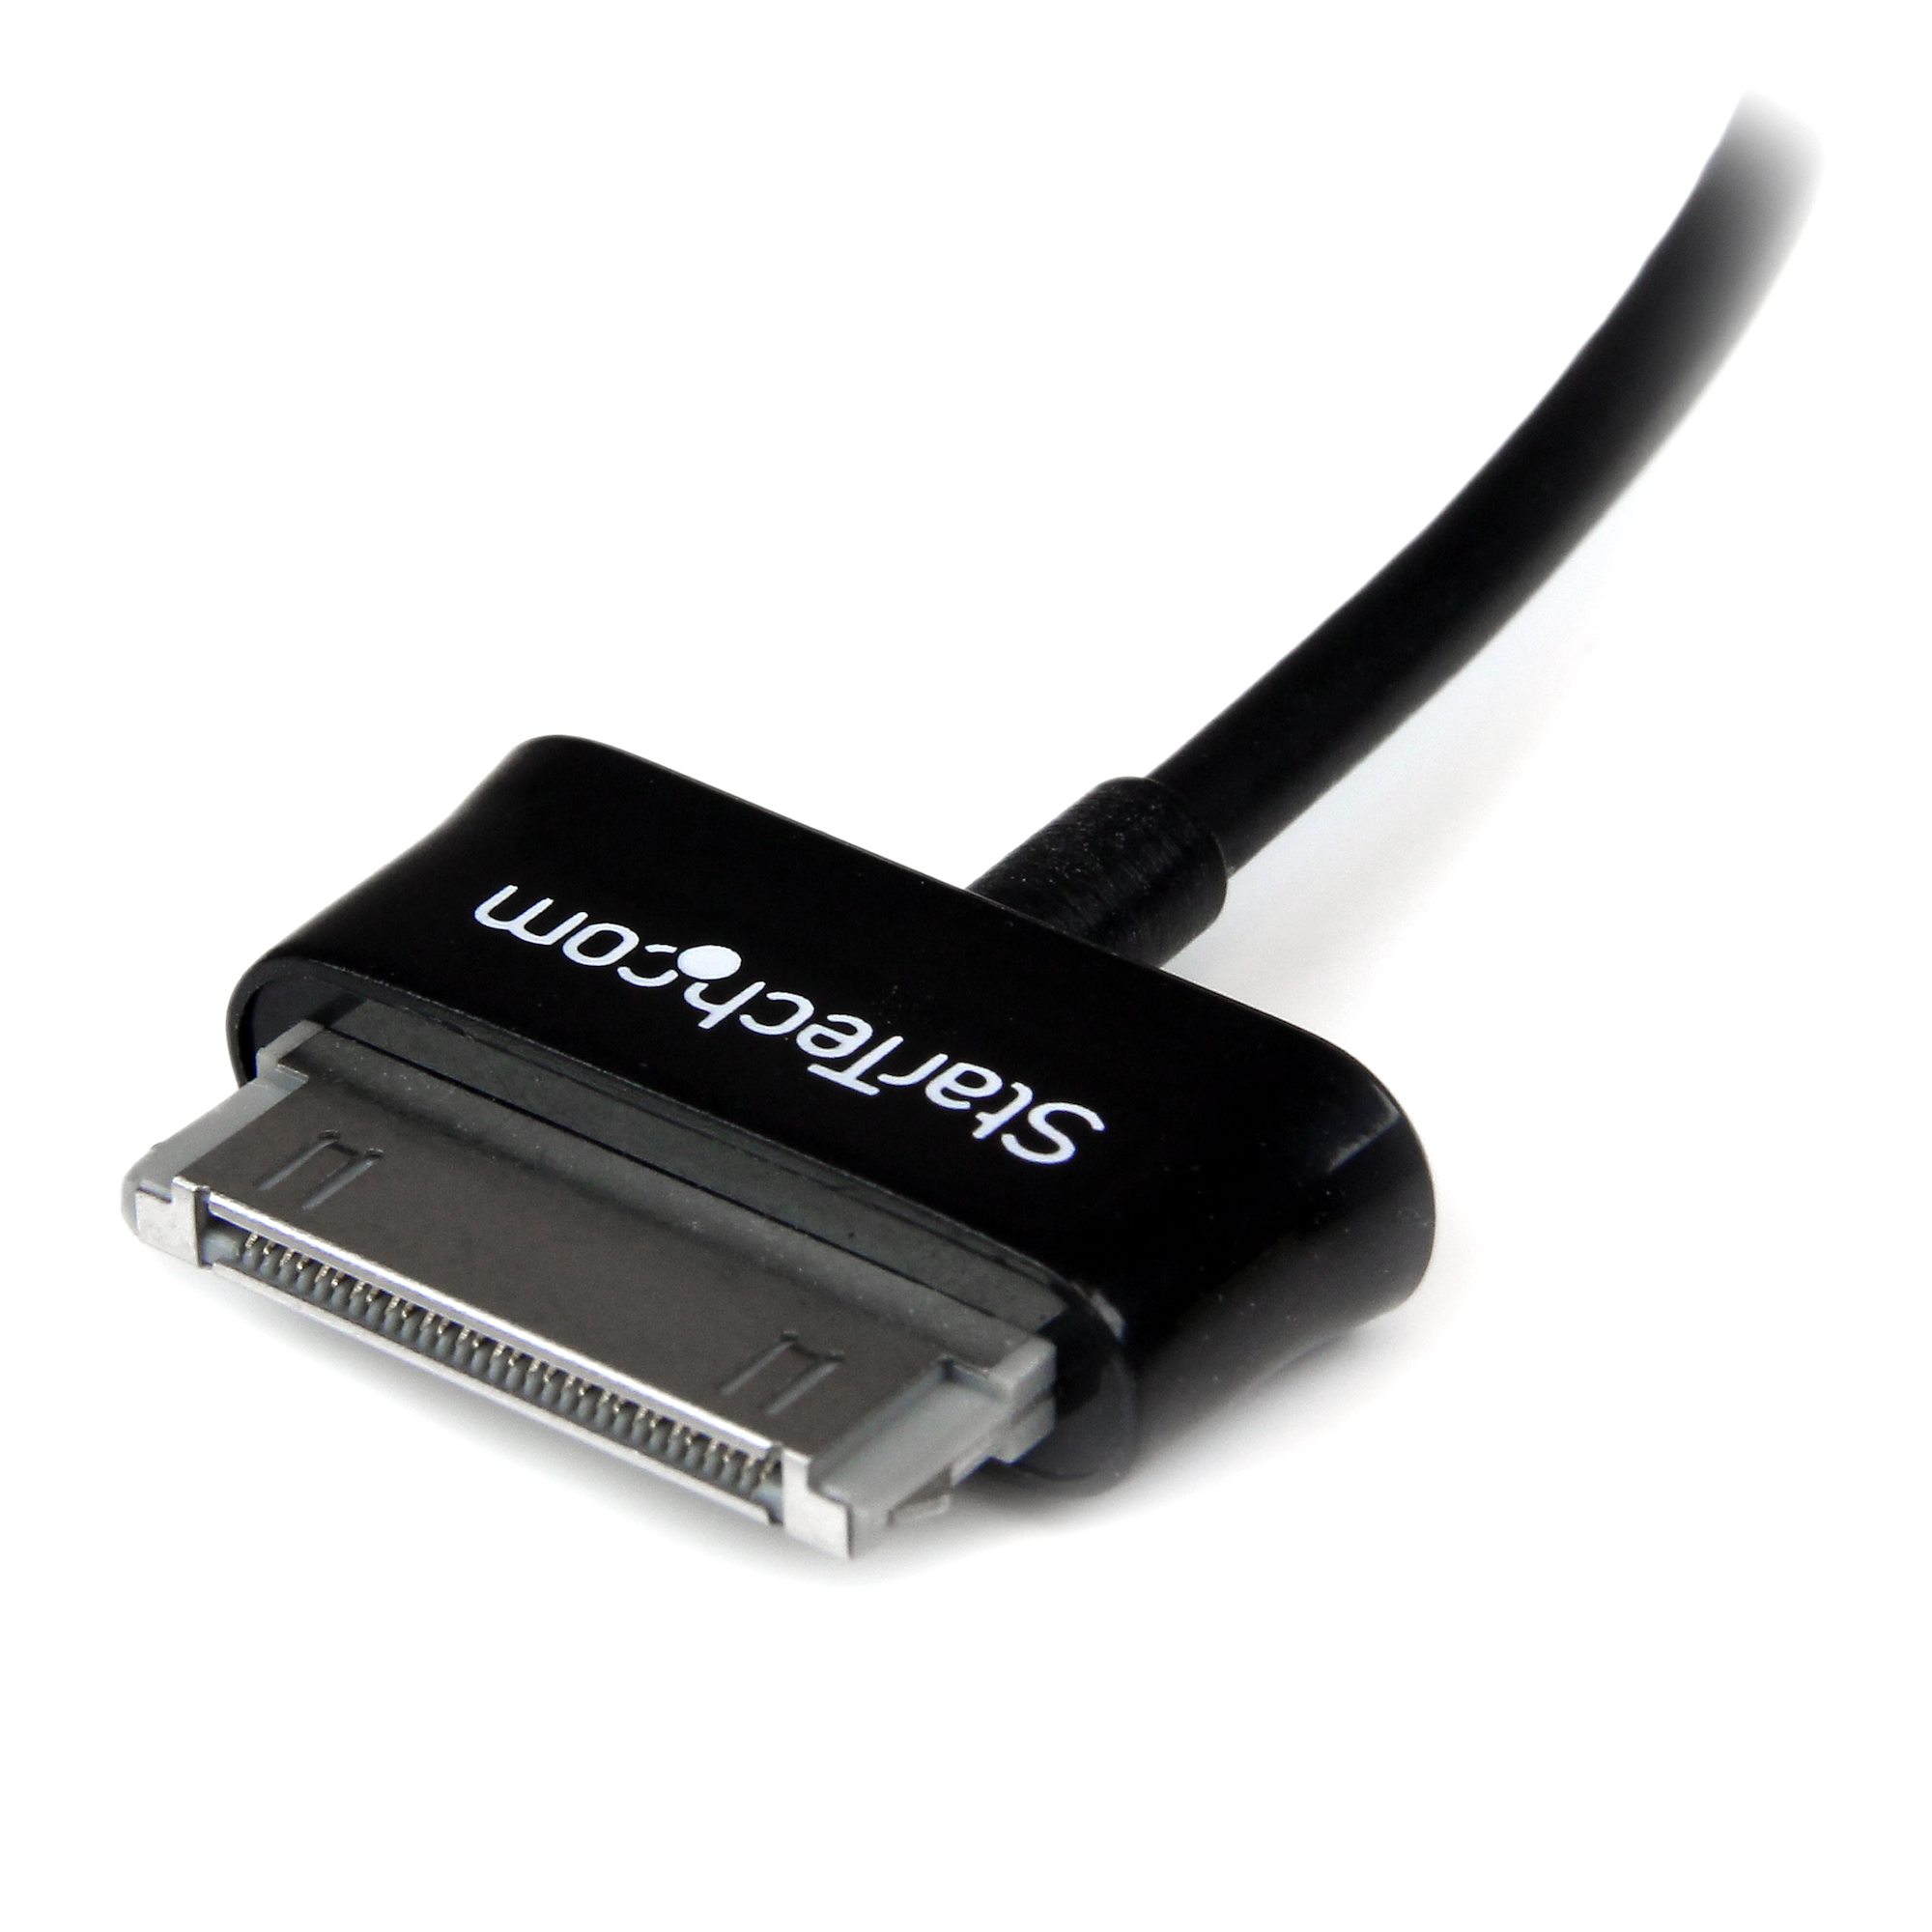 CABLING® Adaptateur Port USB/30pin pour Tablette Samsung Galaxy Tab